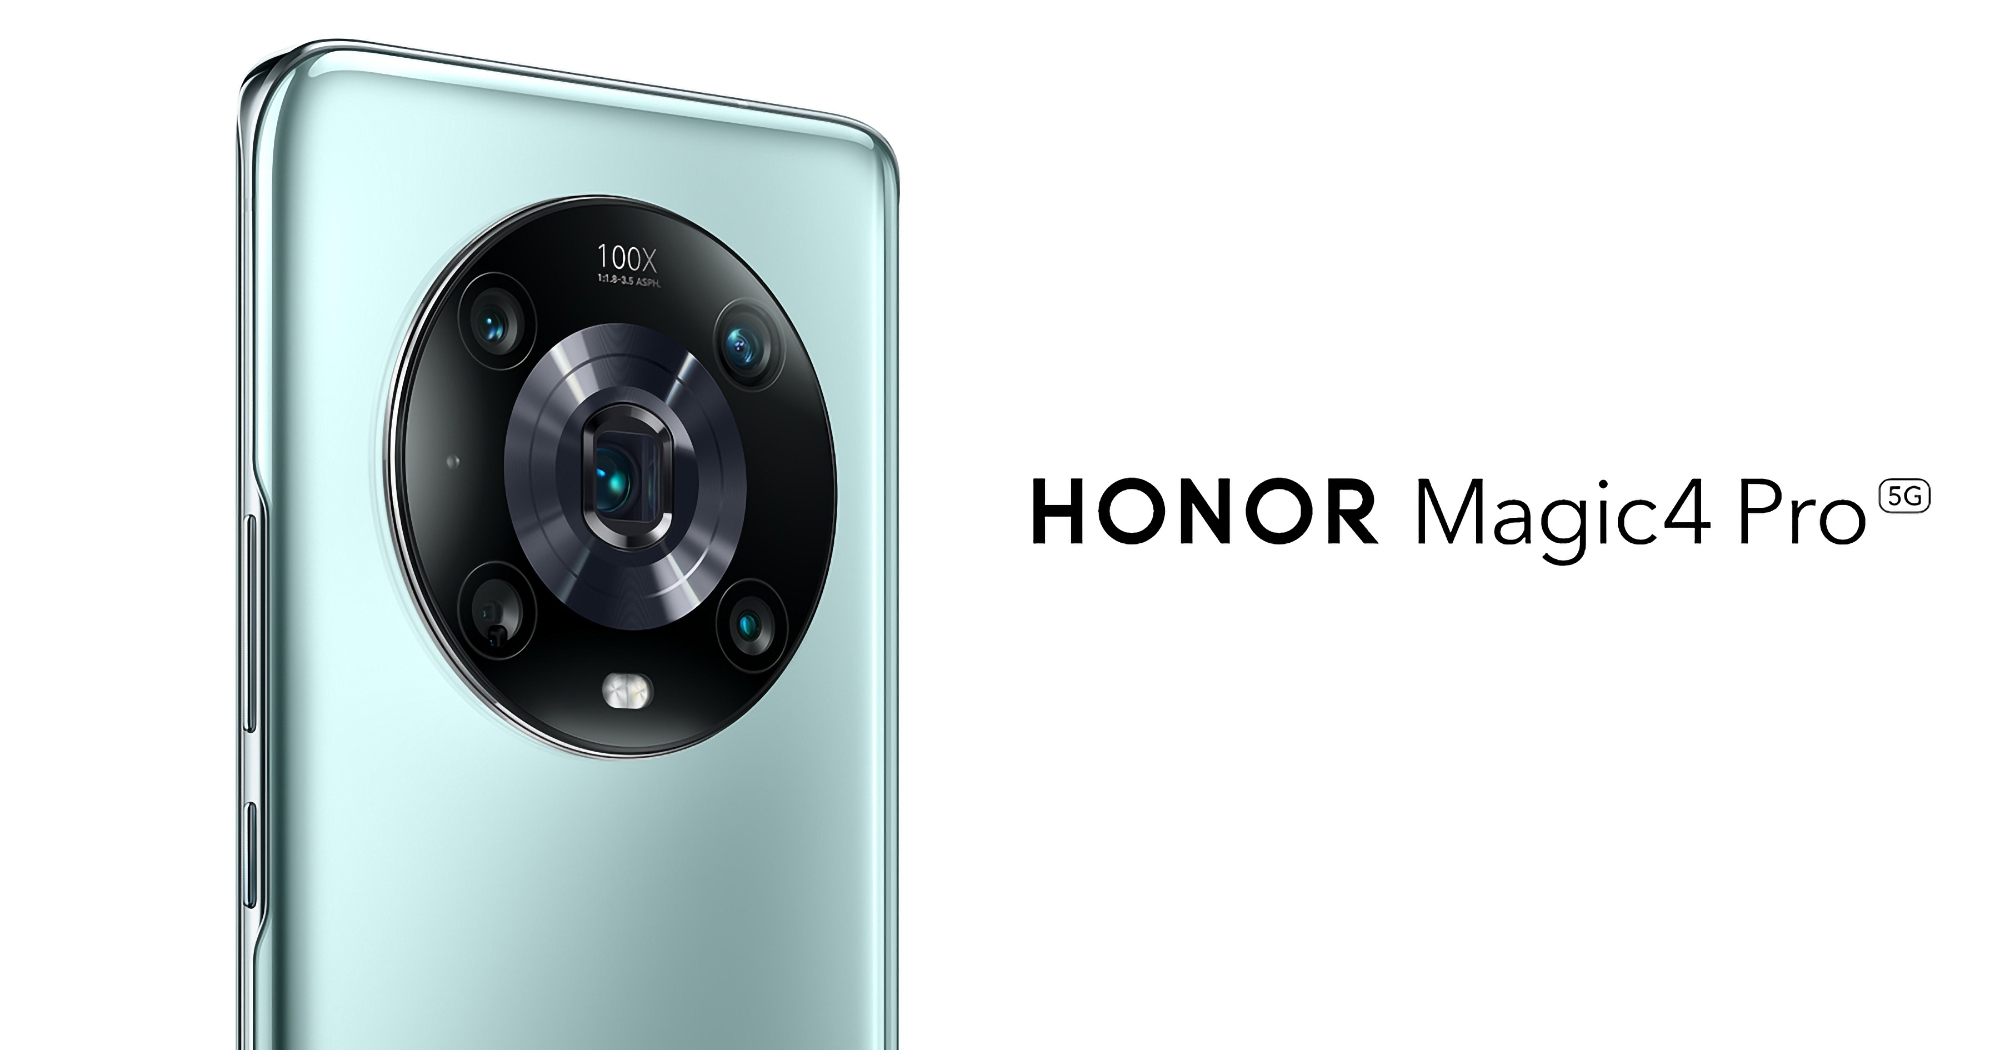 Honor Magic 4 Pro has received a new software version in the global marketplace